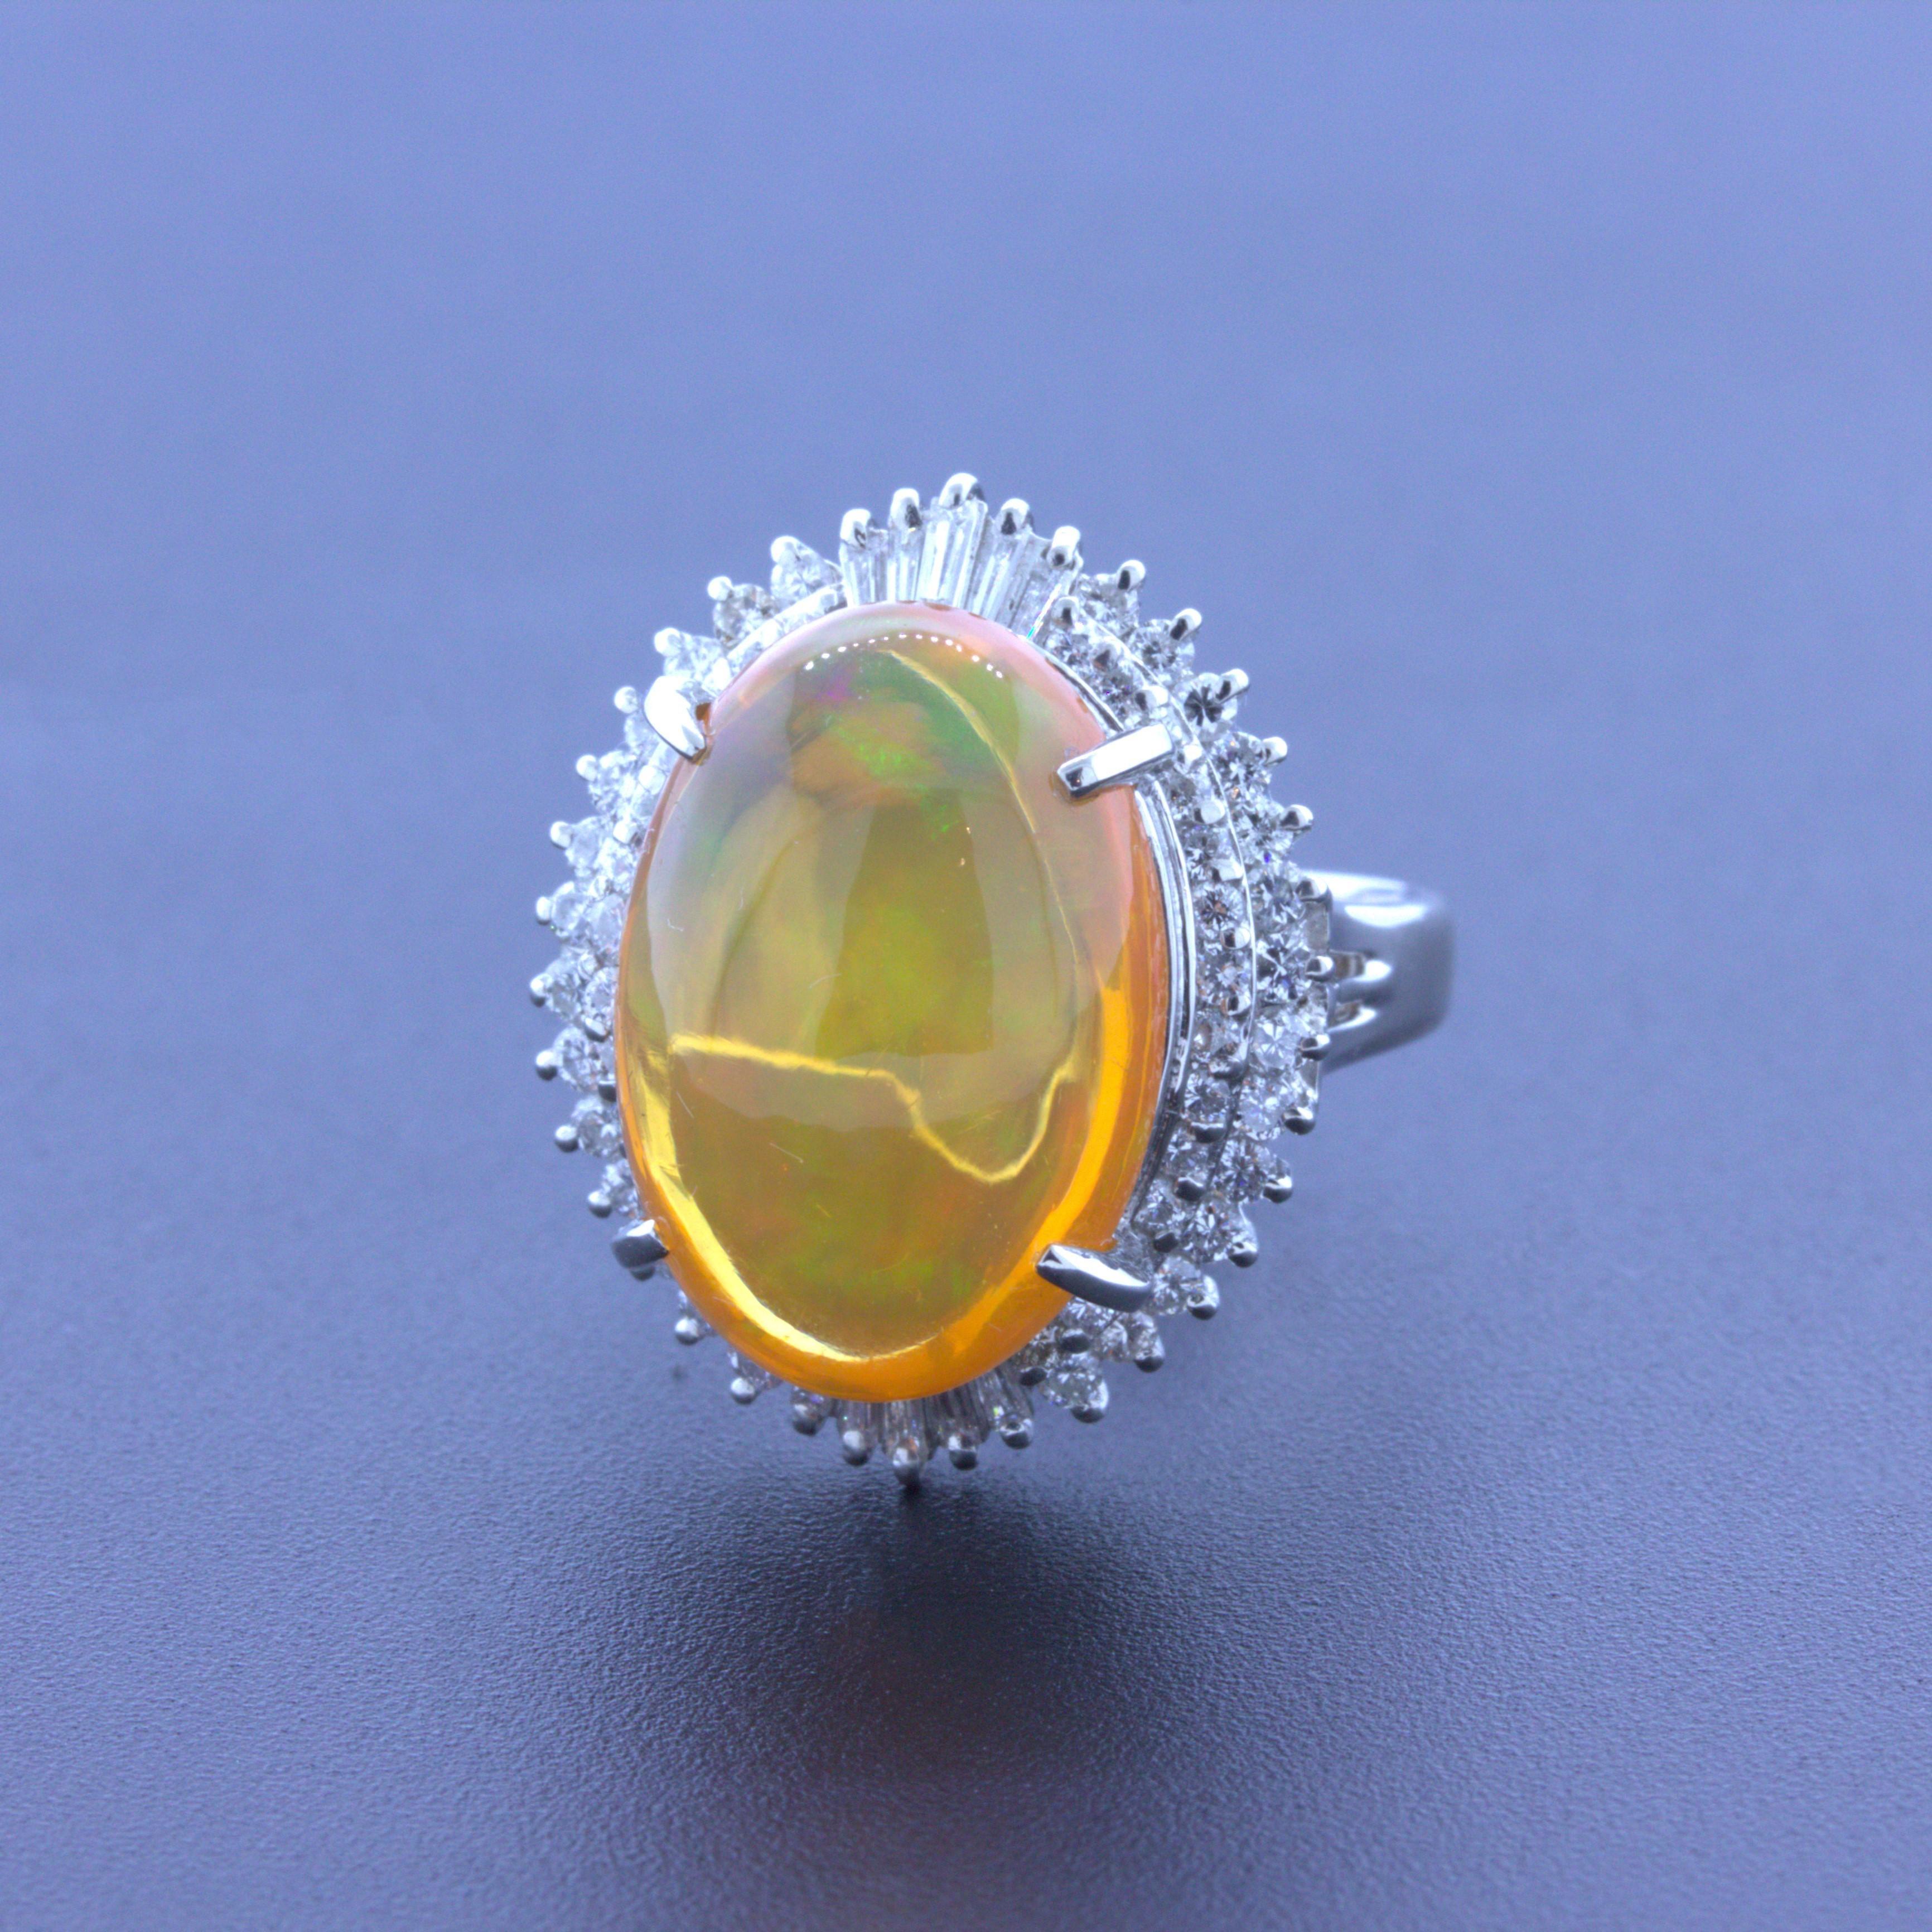 A lovely fire opal ring coming from the mines in Mexico weighing 8.48 carats. The opal has a bright and lively orange color along with excellent play-of-color with flashes of red, orange, green, and yellow all dancing across the stone. It is